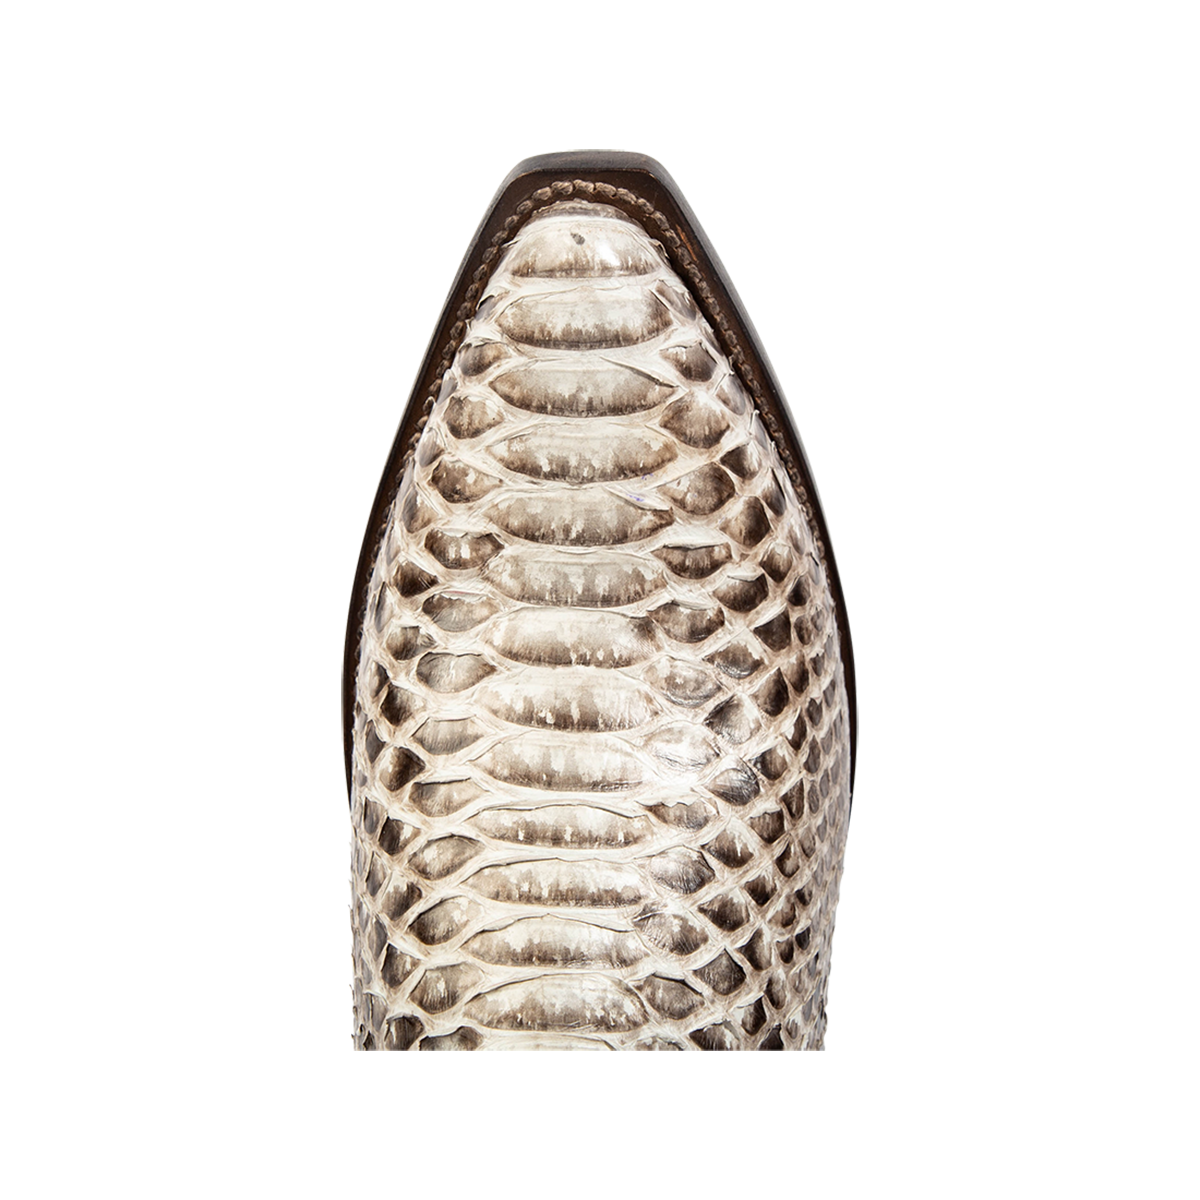 Top view showing snip toe construction and stitch detailing on FREEBIRD men's Marshall grey python leather western cowboy boot